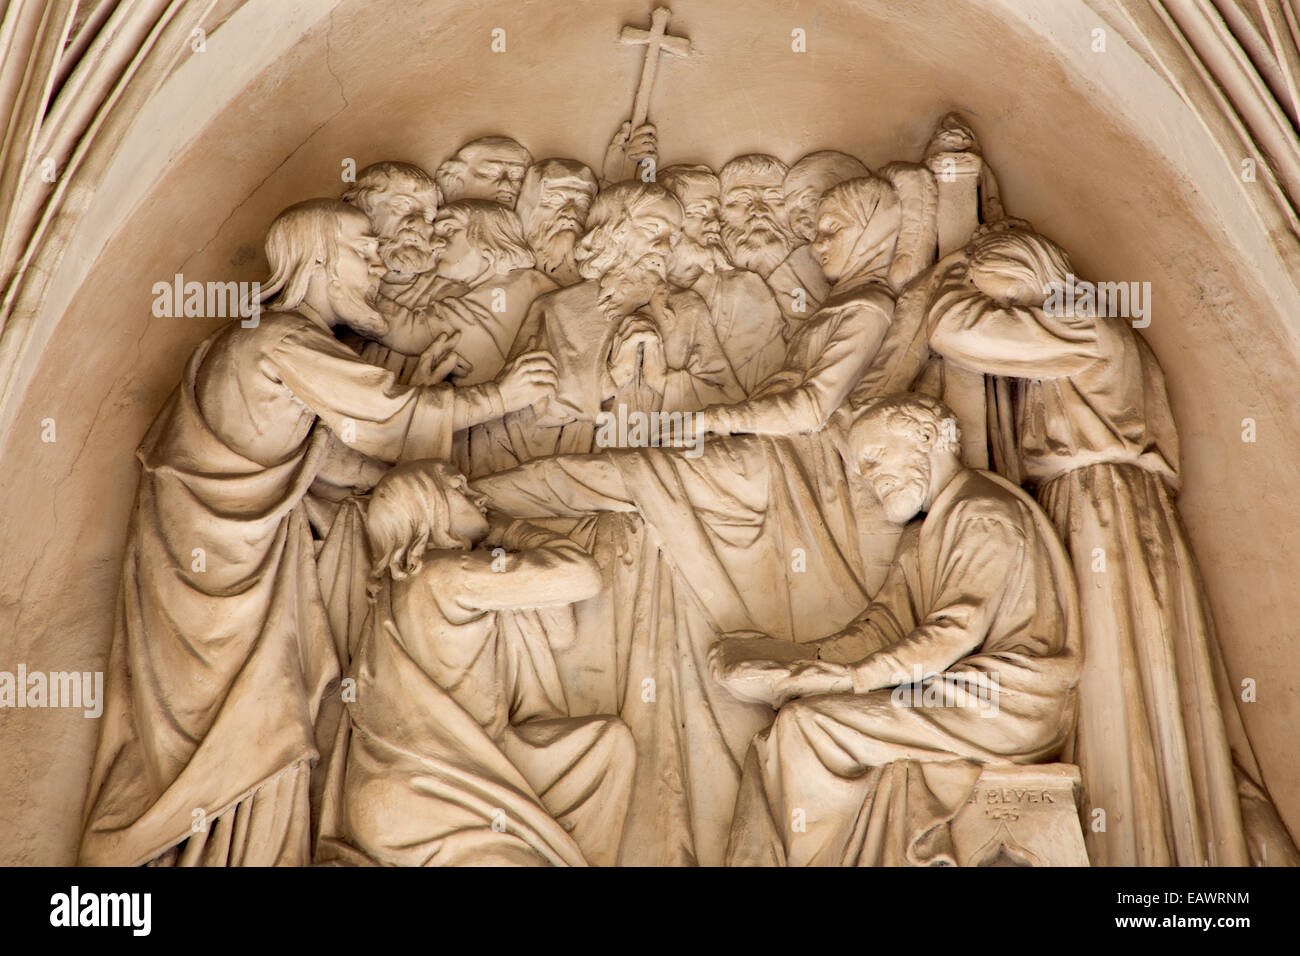 VIENNA, AUSTRIA - JULY 3, 2013: The relief of the death of Virgin Mary on the south portal of gothic church Maria am Gestade. Stock Photo